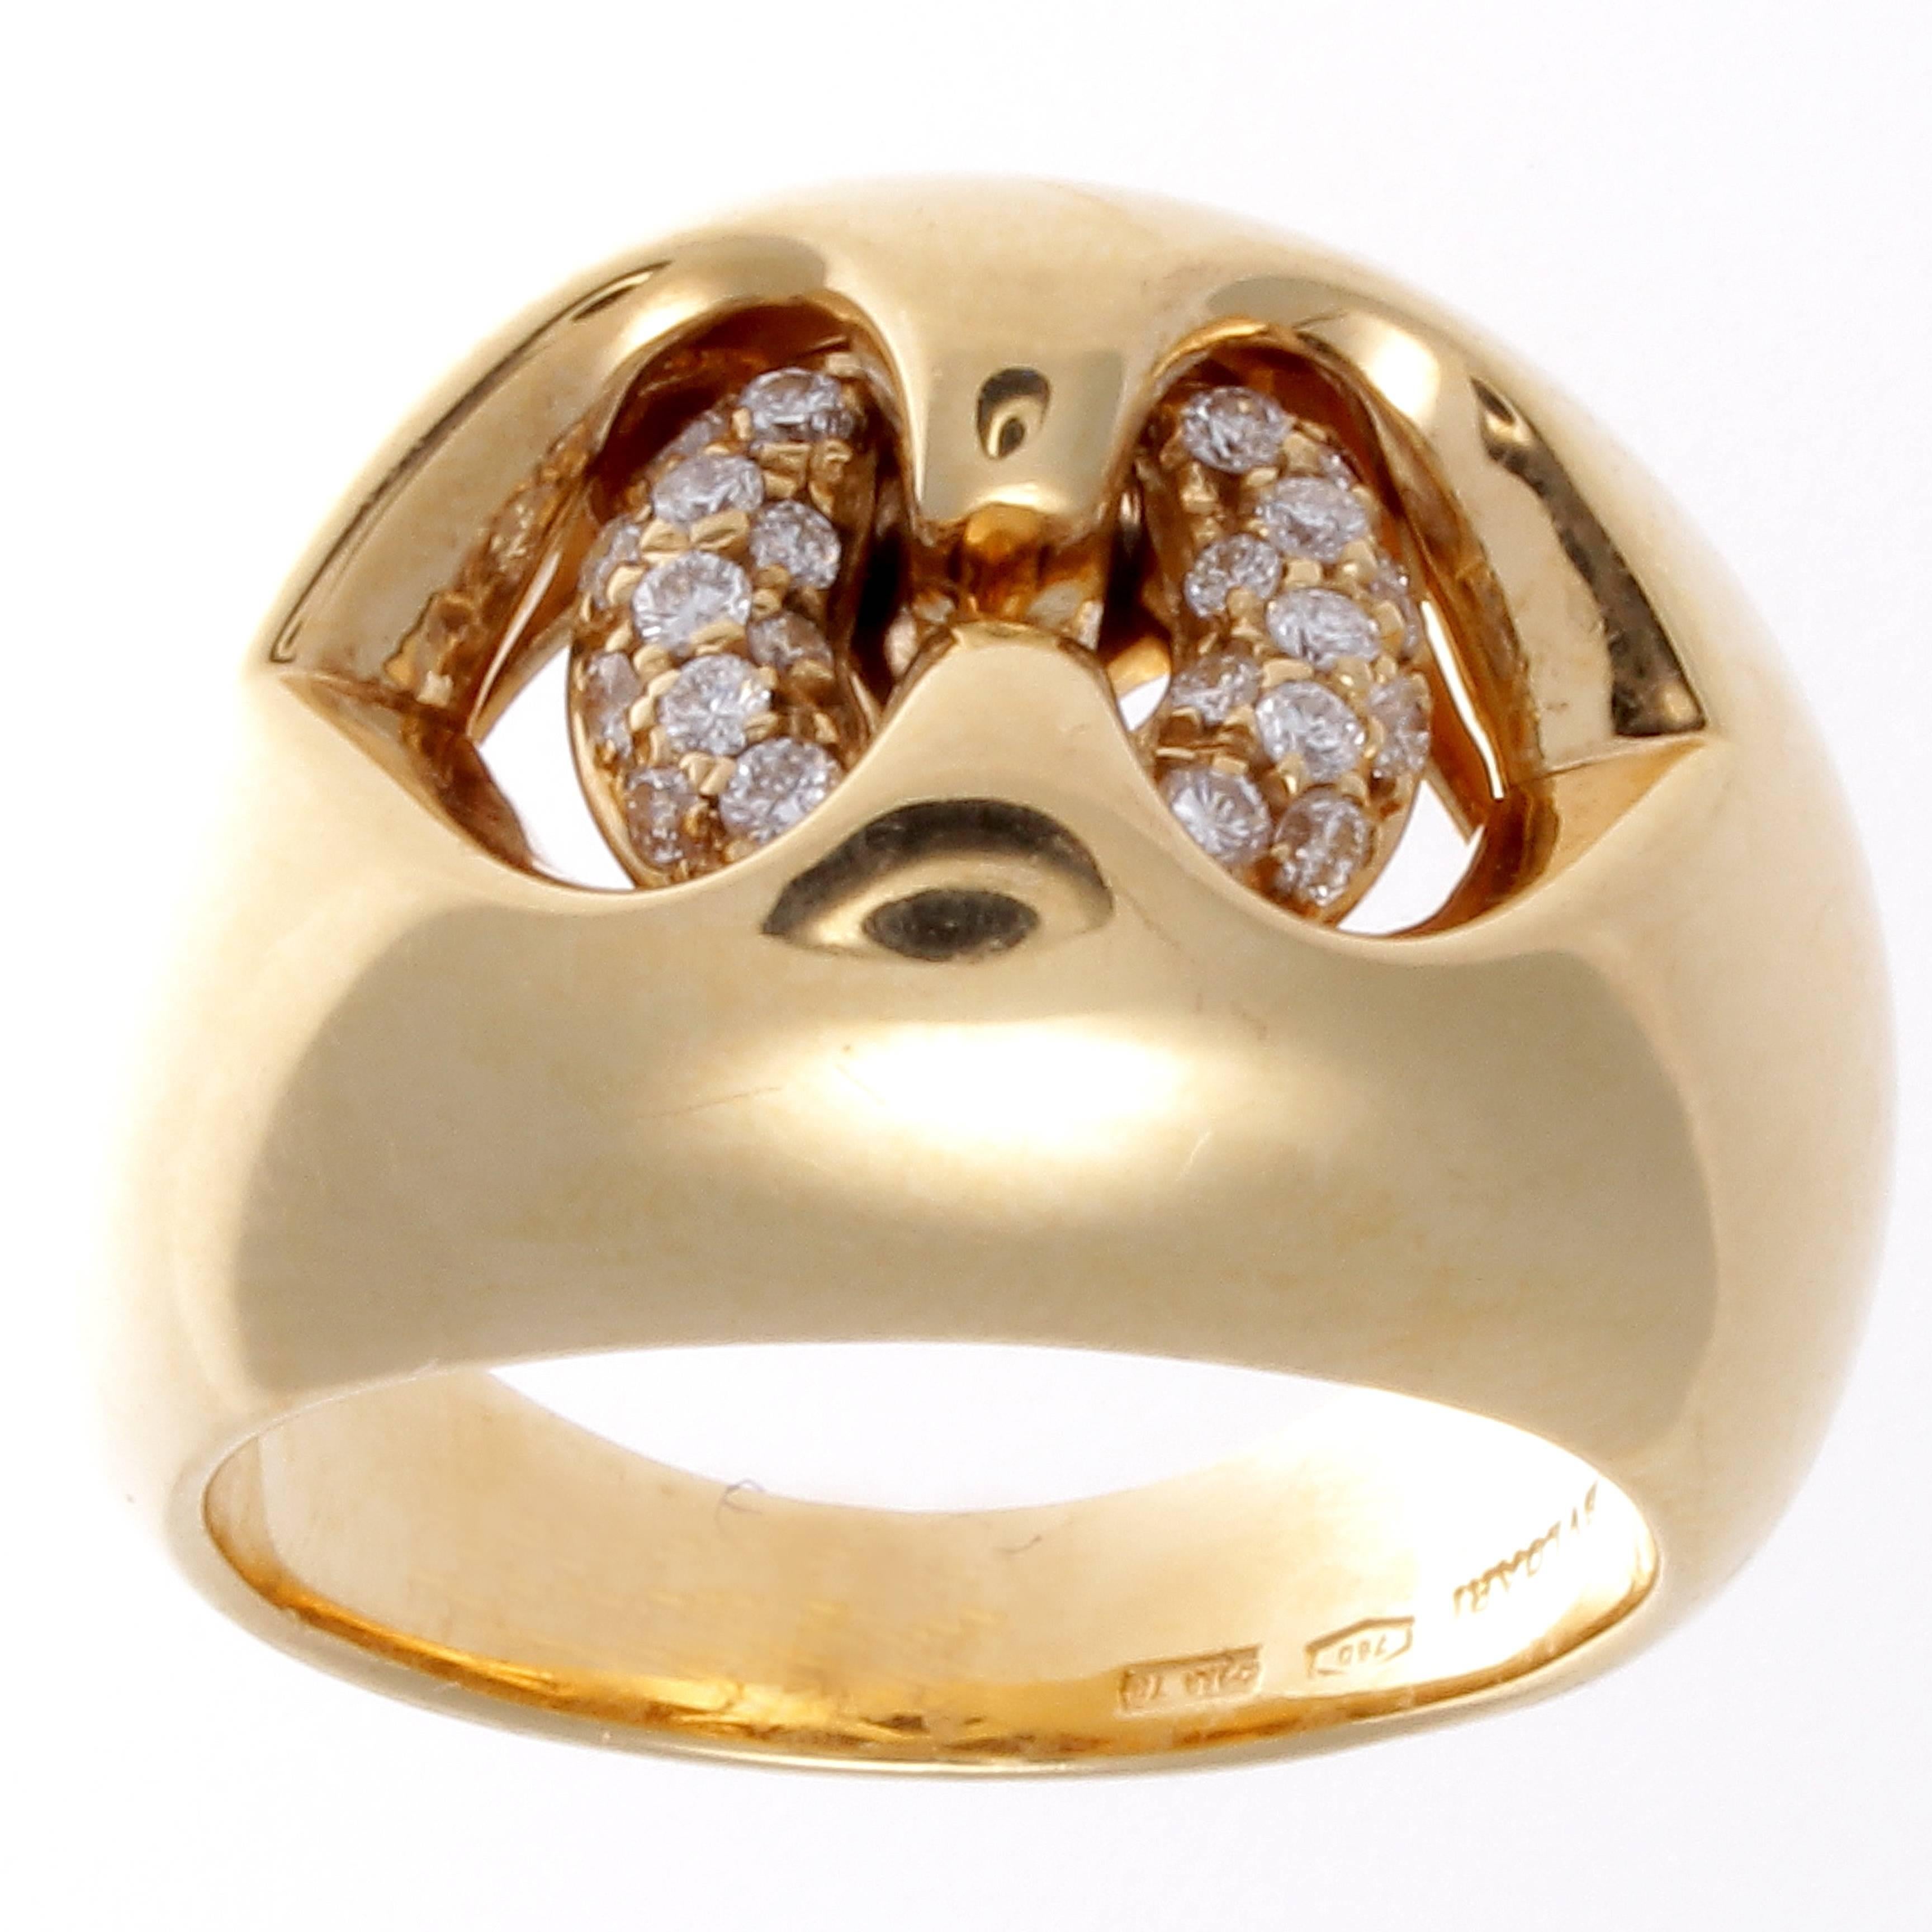 A unique design from Bulgari. Featuring open spaces filled with diamonds. Crafted in smooth curving lines of 18k glistening yellow gold. Signed Bulgari. 

Ring size 6 and may be resized.